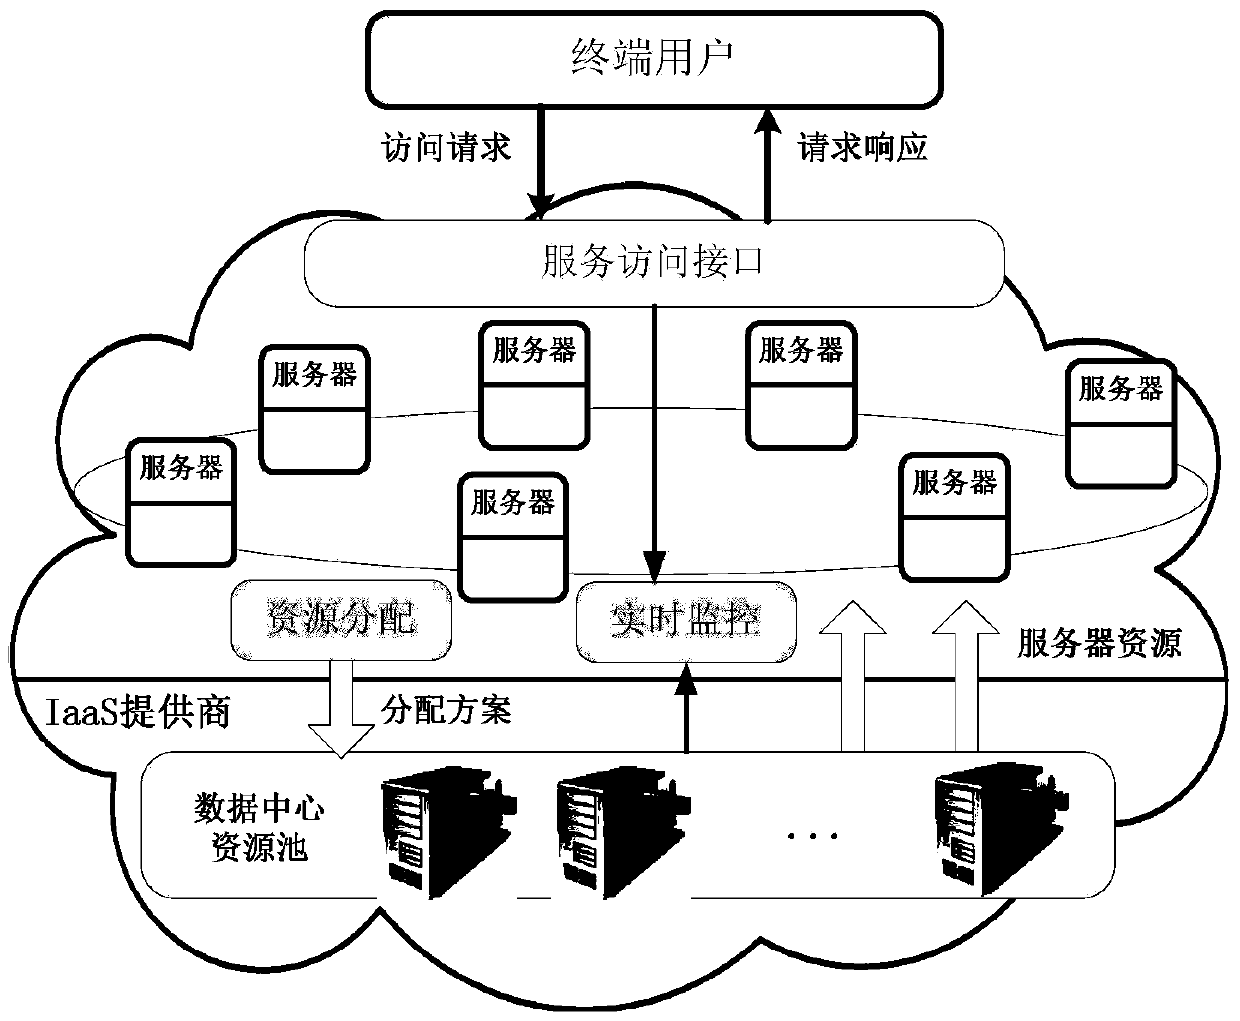 A method for dynamic resource allocation of cloud storage system based on dht mechanism